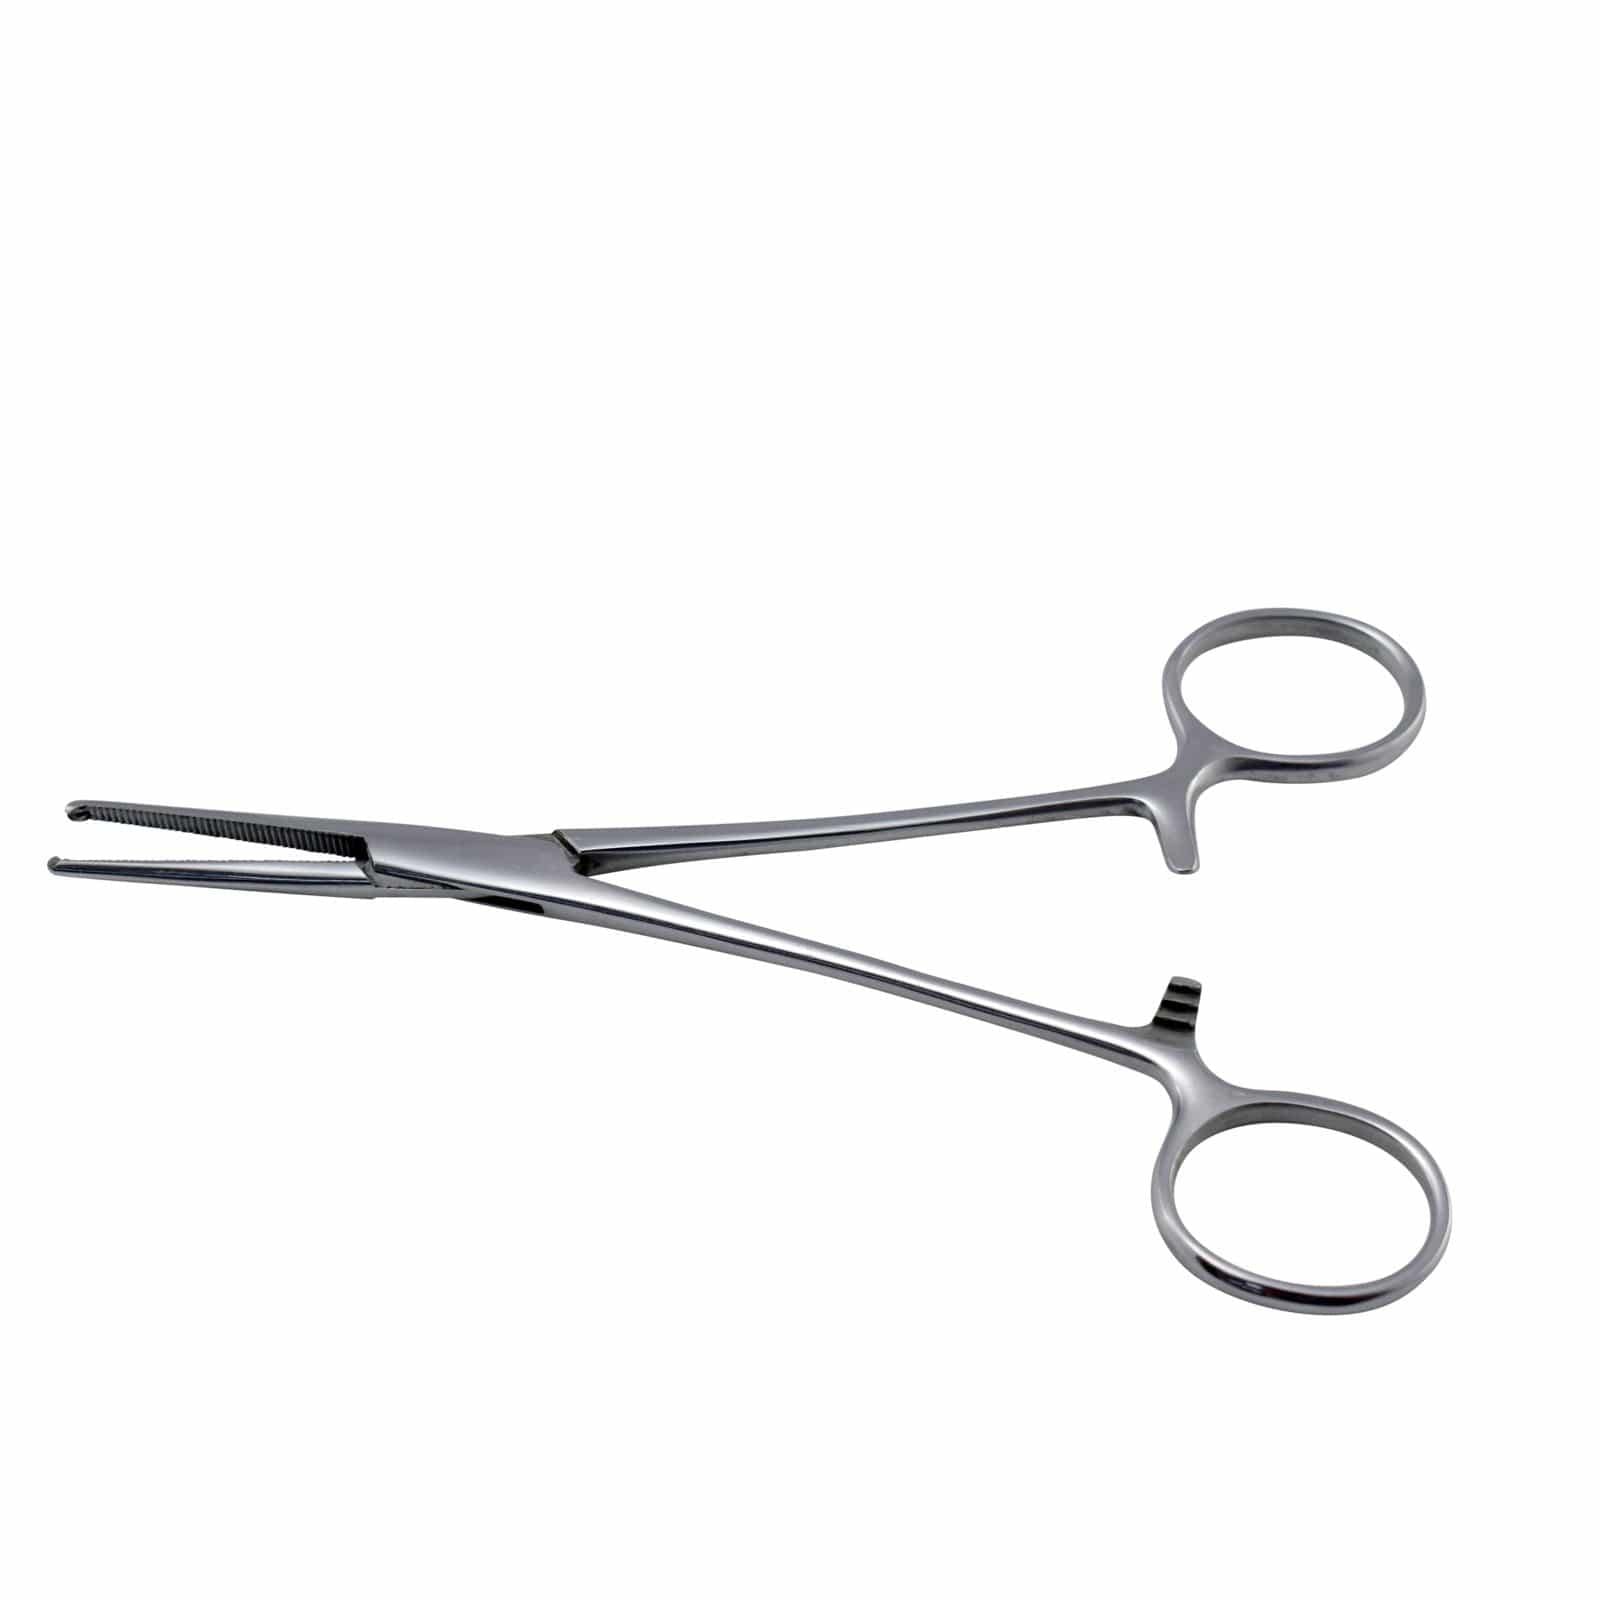 Armo Surgical Instruments 16cm / Straight Armo ROCHESTER-OCHSNER Artery Forcep